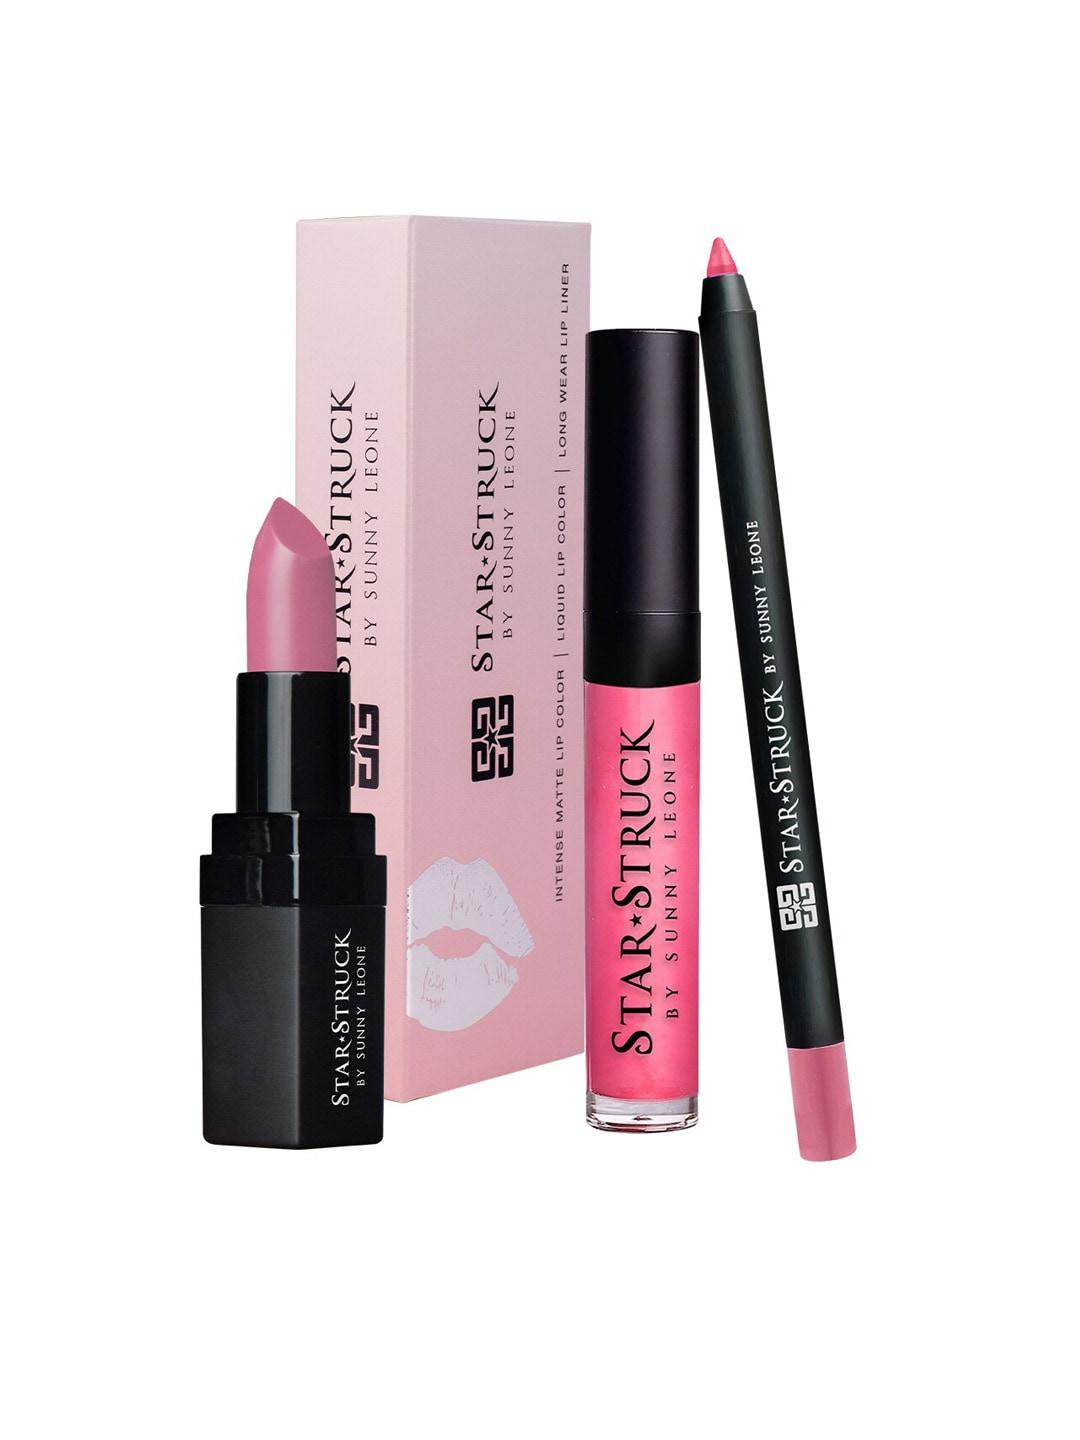 star-struck-by-sunny-leone-set-of-3-long-lasting-highly-pigmented-lip-kit--pink-peony